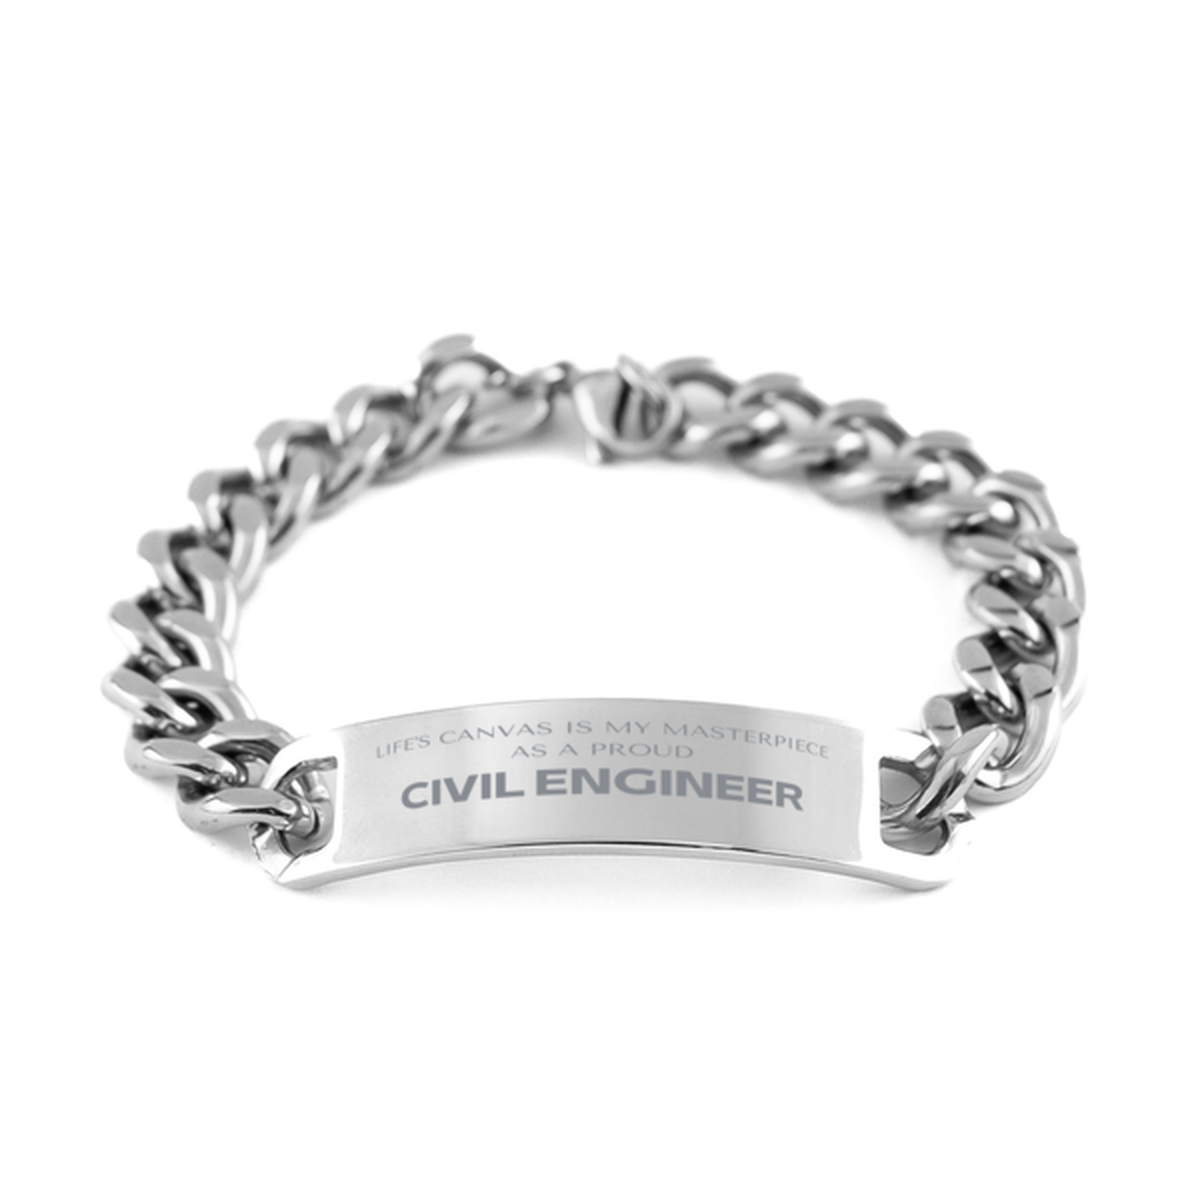 Proud Civil Engineer Gifts, Life's canvas is my masterpiece, Epic Birthday Christmas Unique Cuban Chain Stainless Steel Bracelet For Civil Engineer, Coworkers, Men, Women, Friends